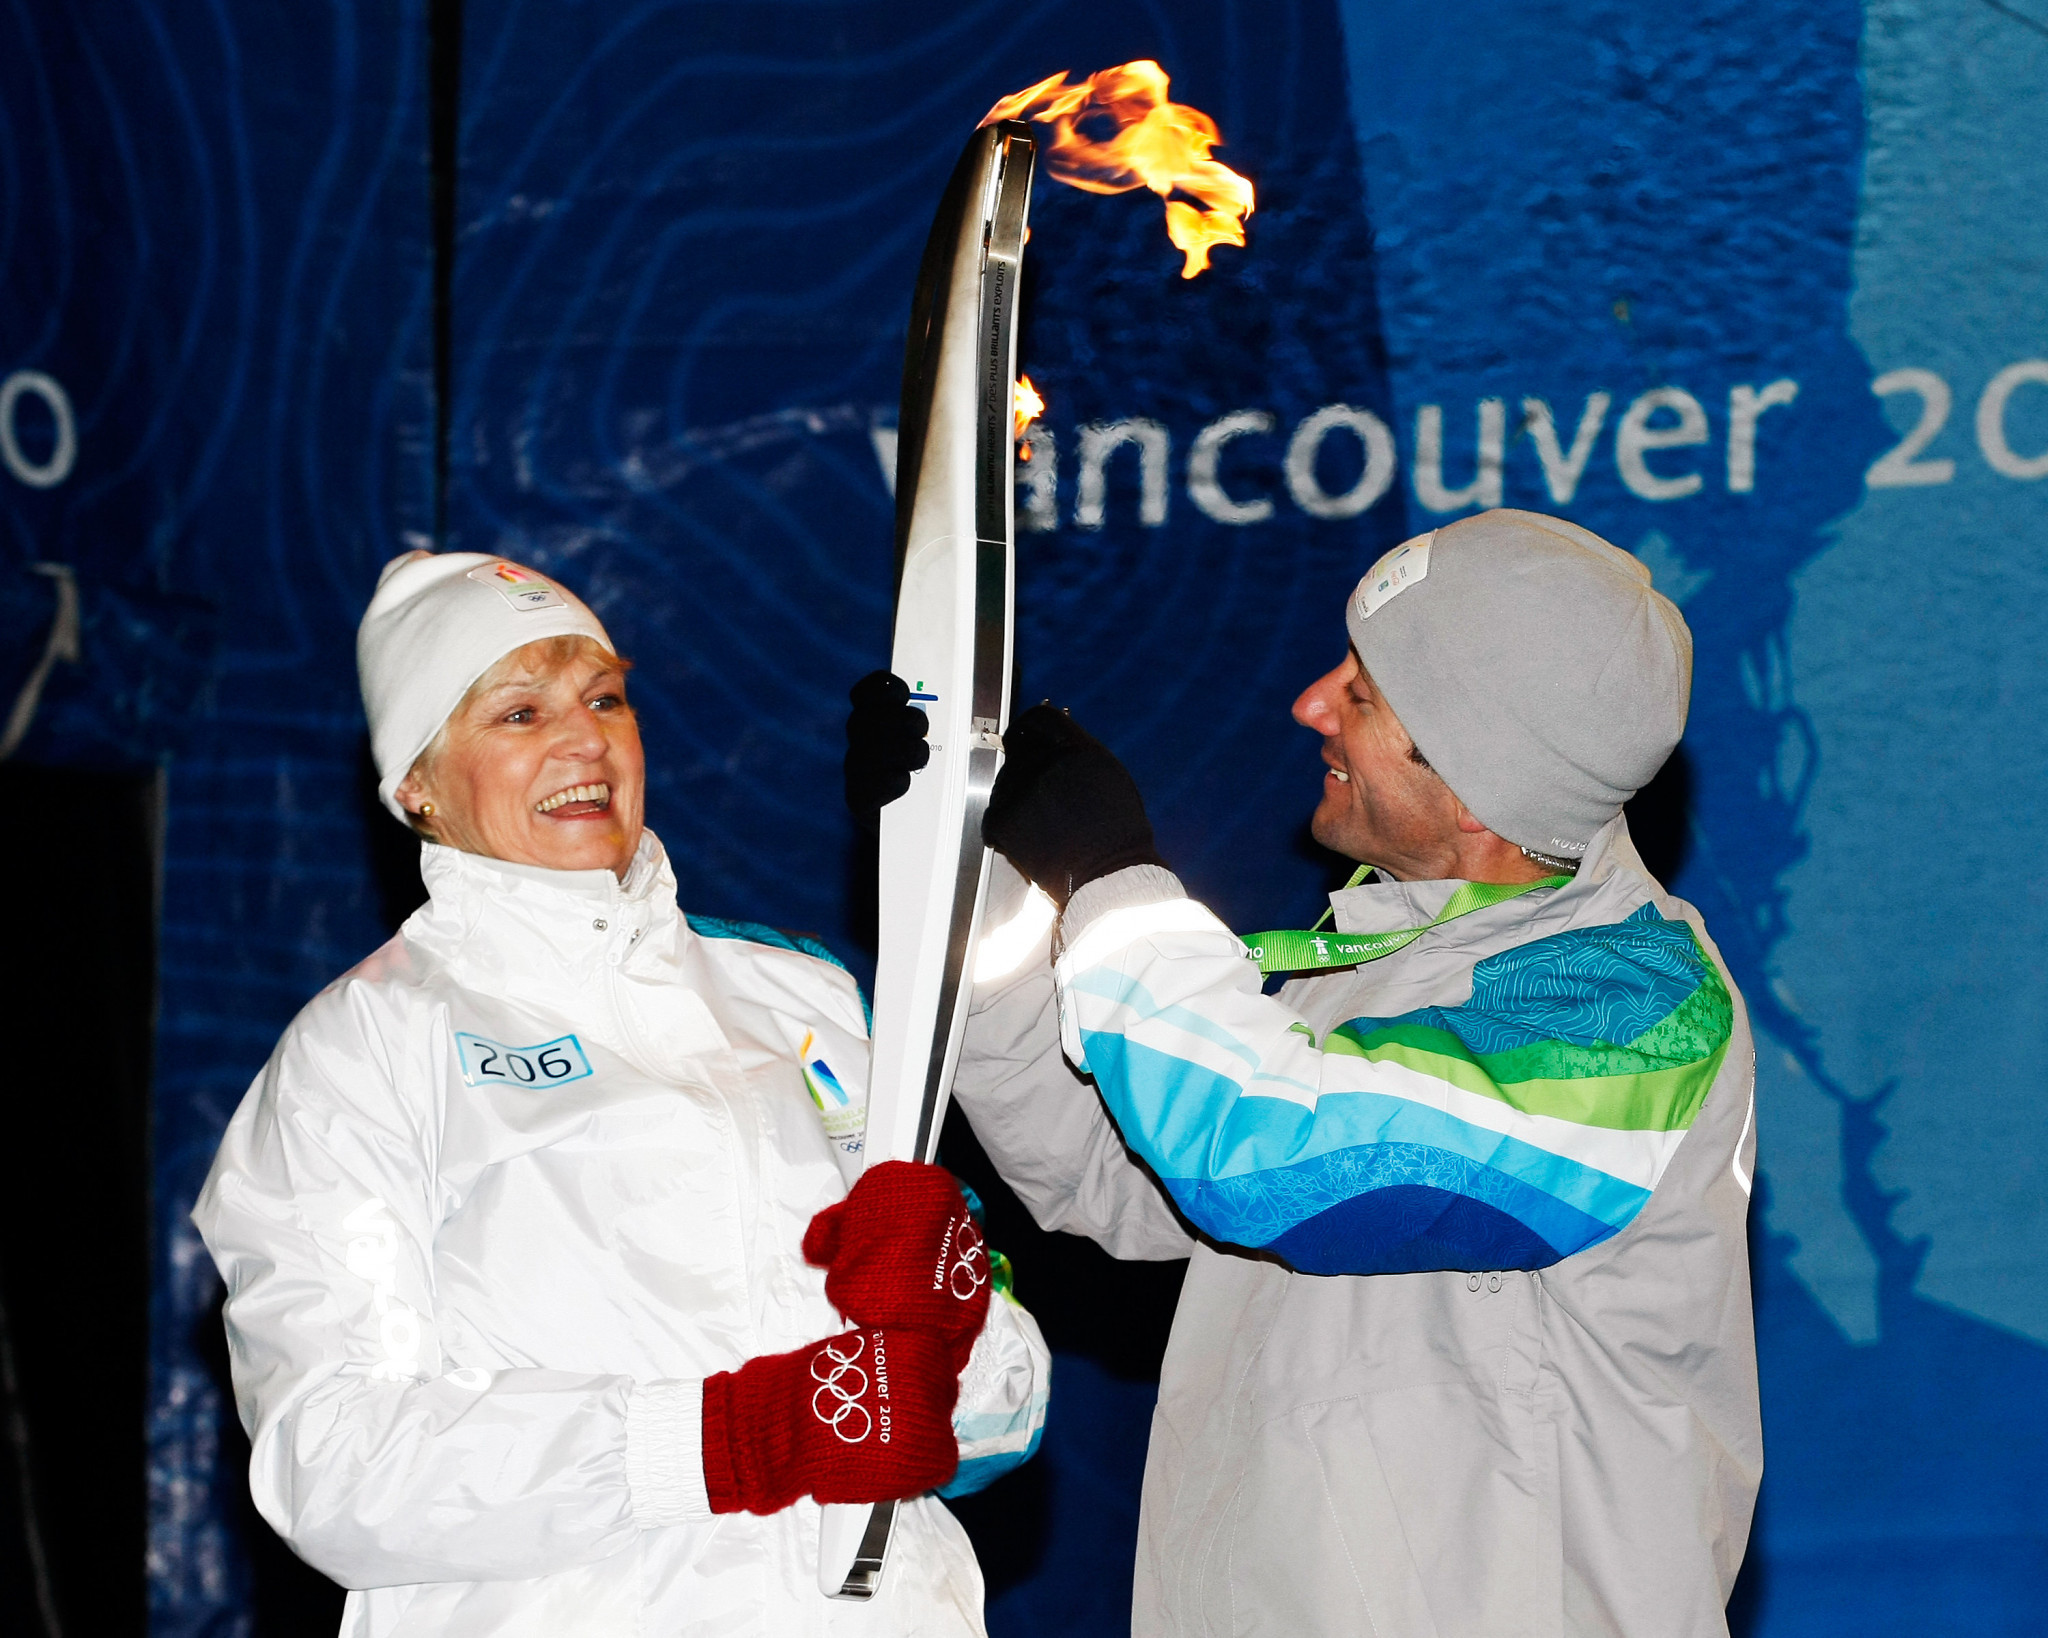 Veteran rower Guylaine Bernier, pictured as a Torchbearer ahead of the Vancouver Winter Olympics in 2010, is set to be inducted into the Hall of Fame ©Getty Images